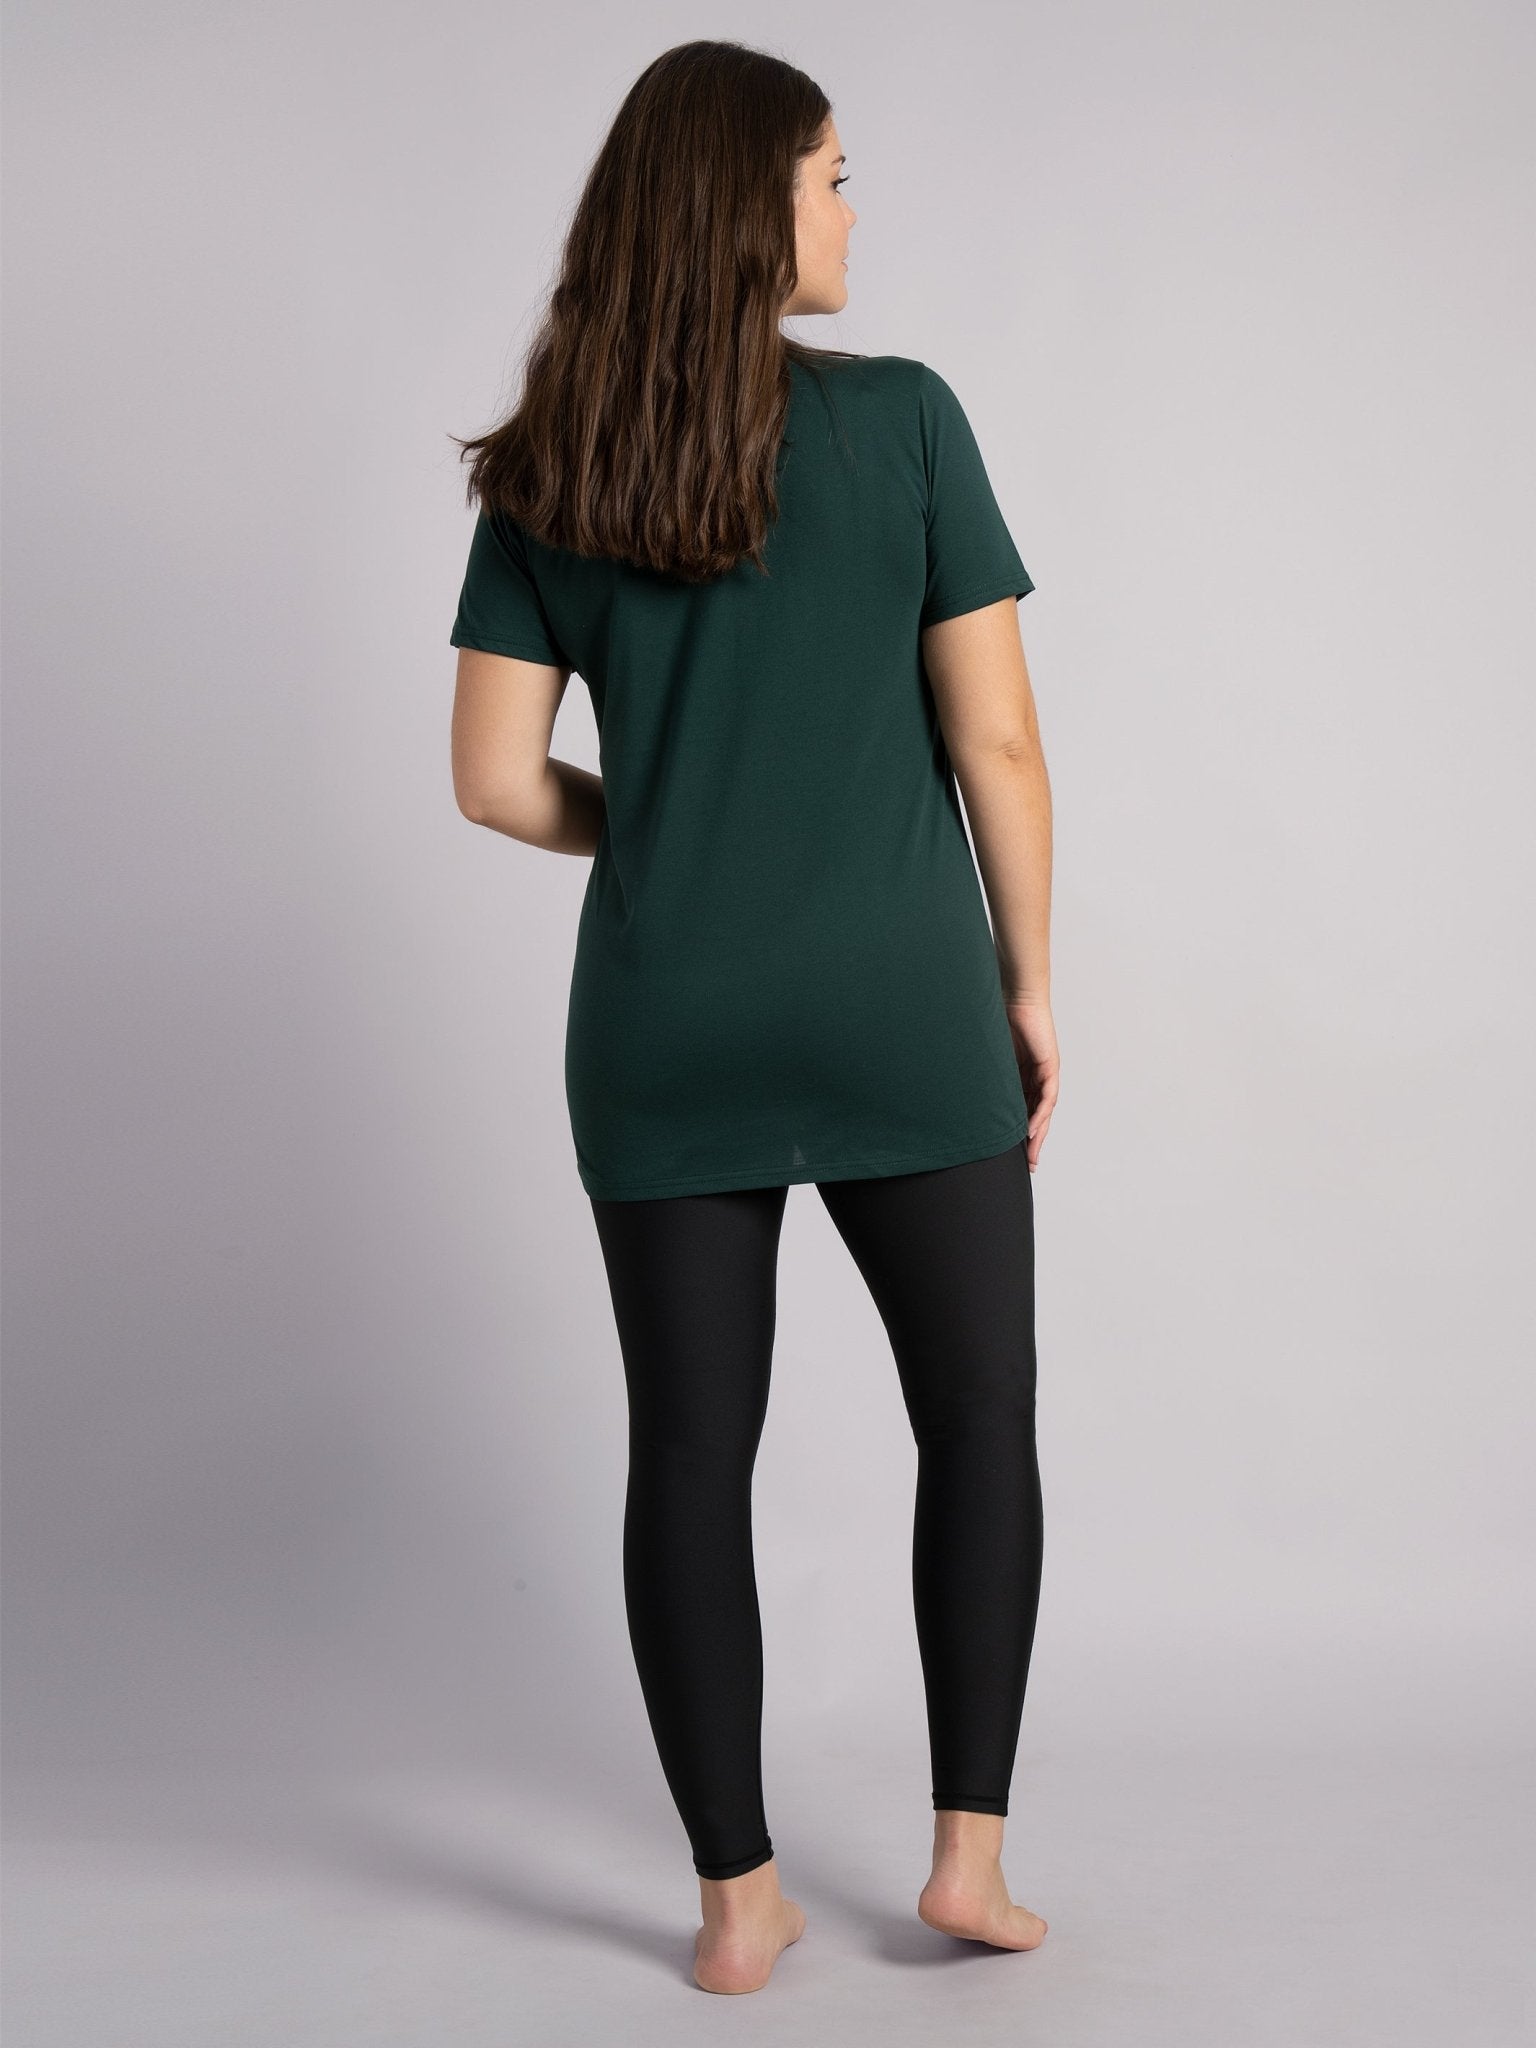 Ecomove Ultra High-Rise Legging with Pockets - Power